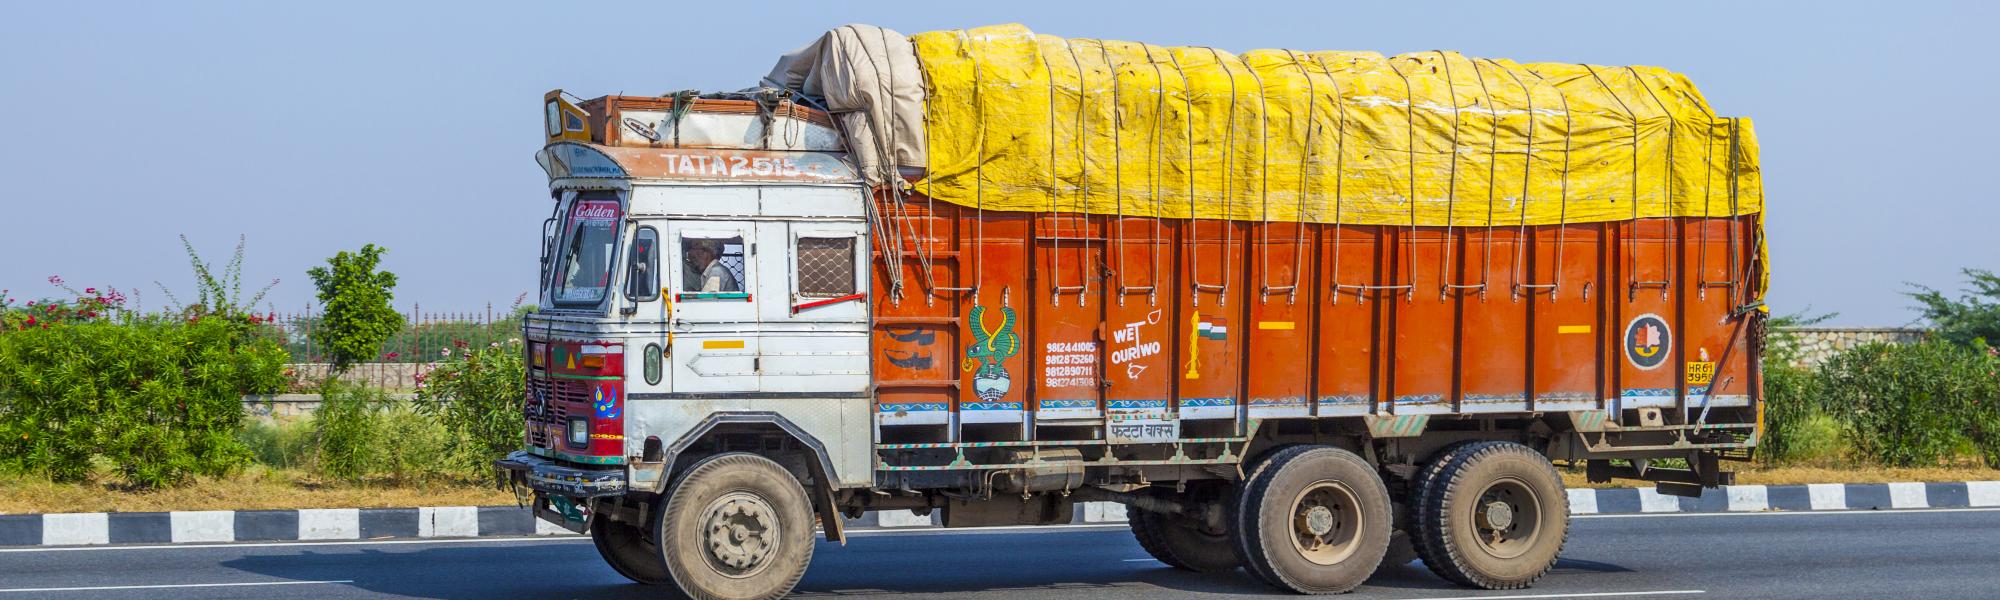 Indian truck on a highway